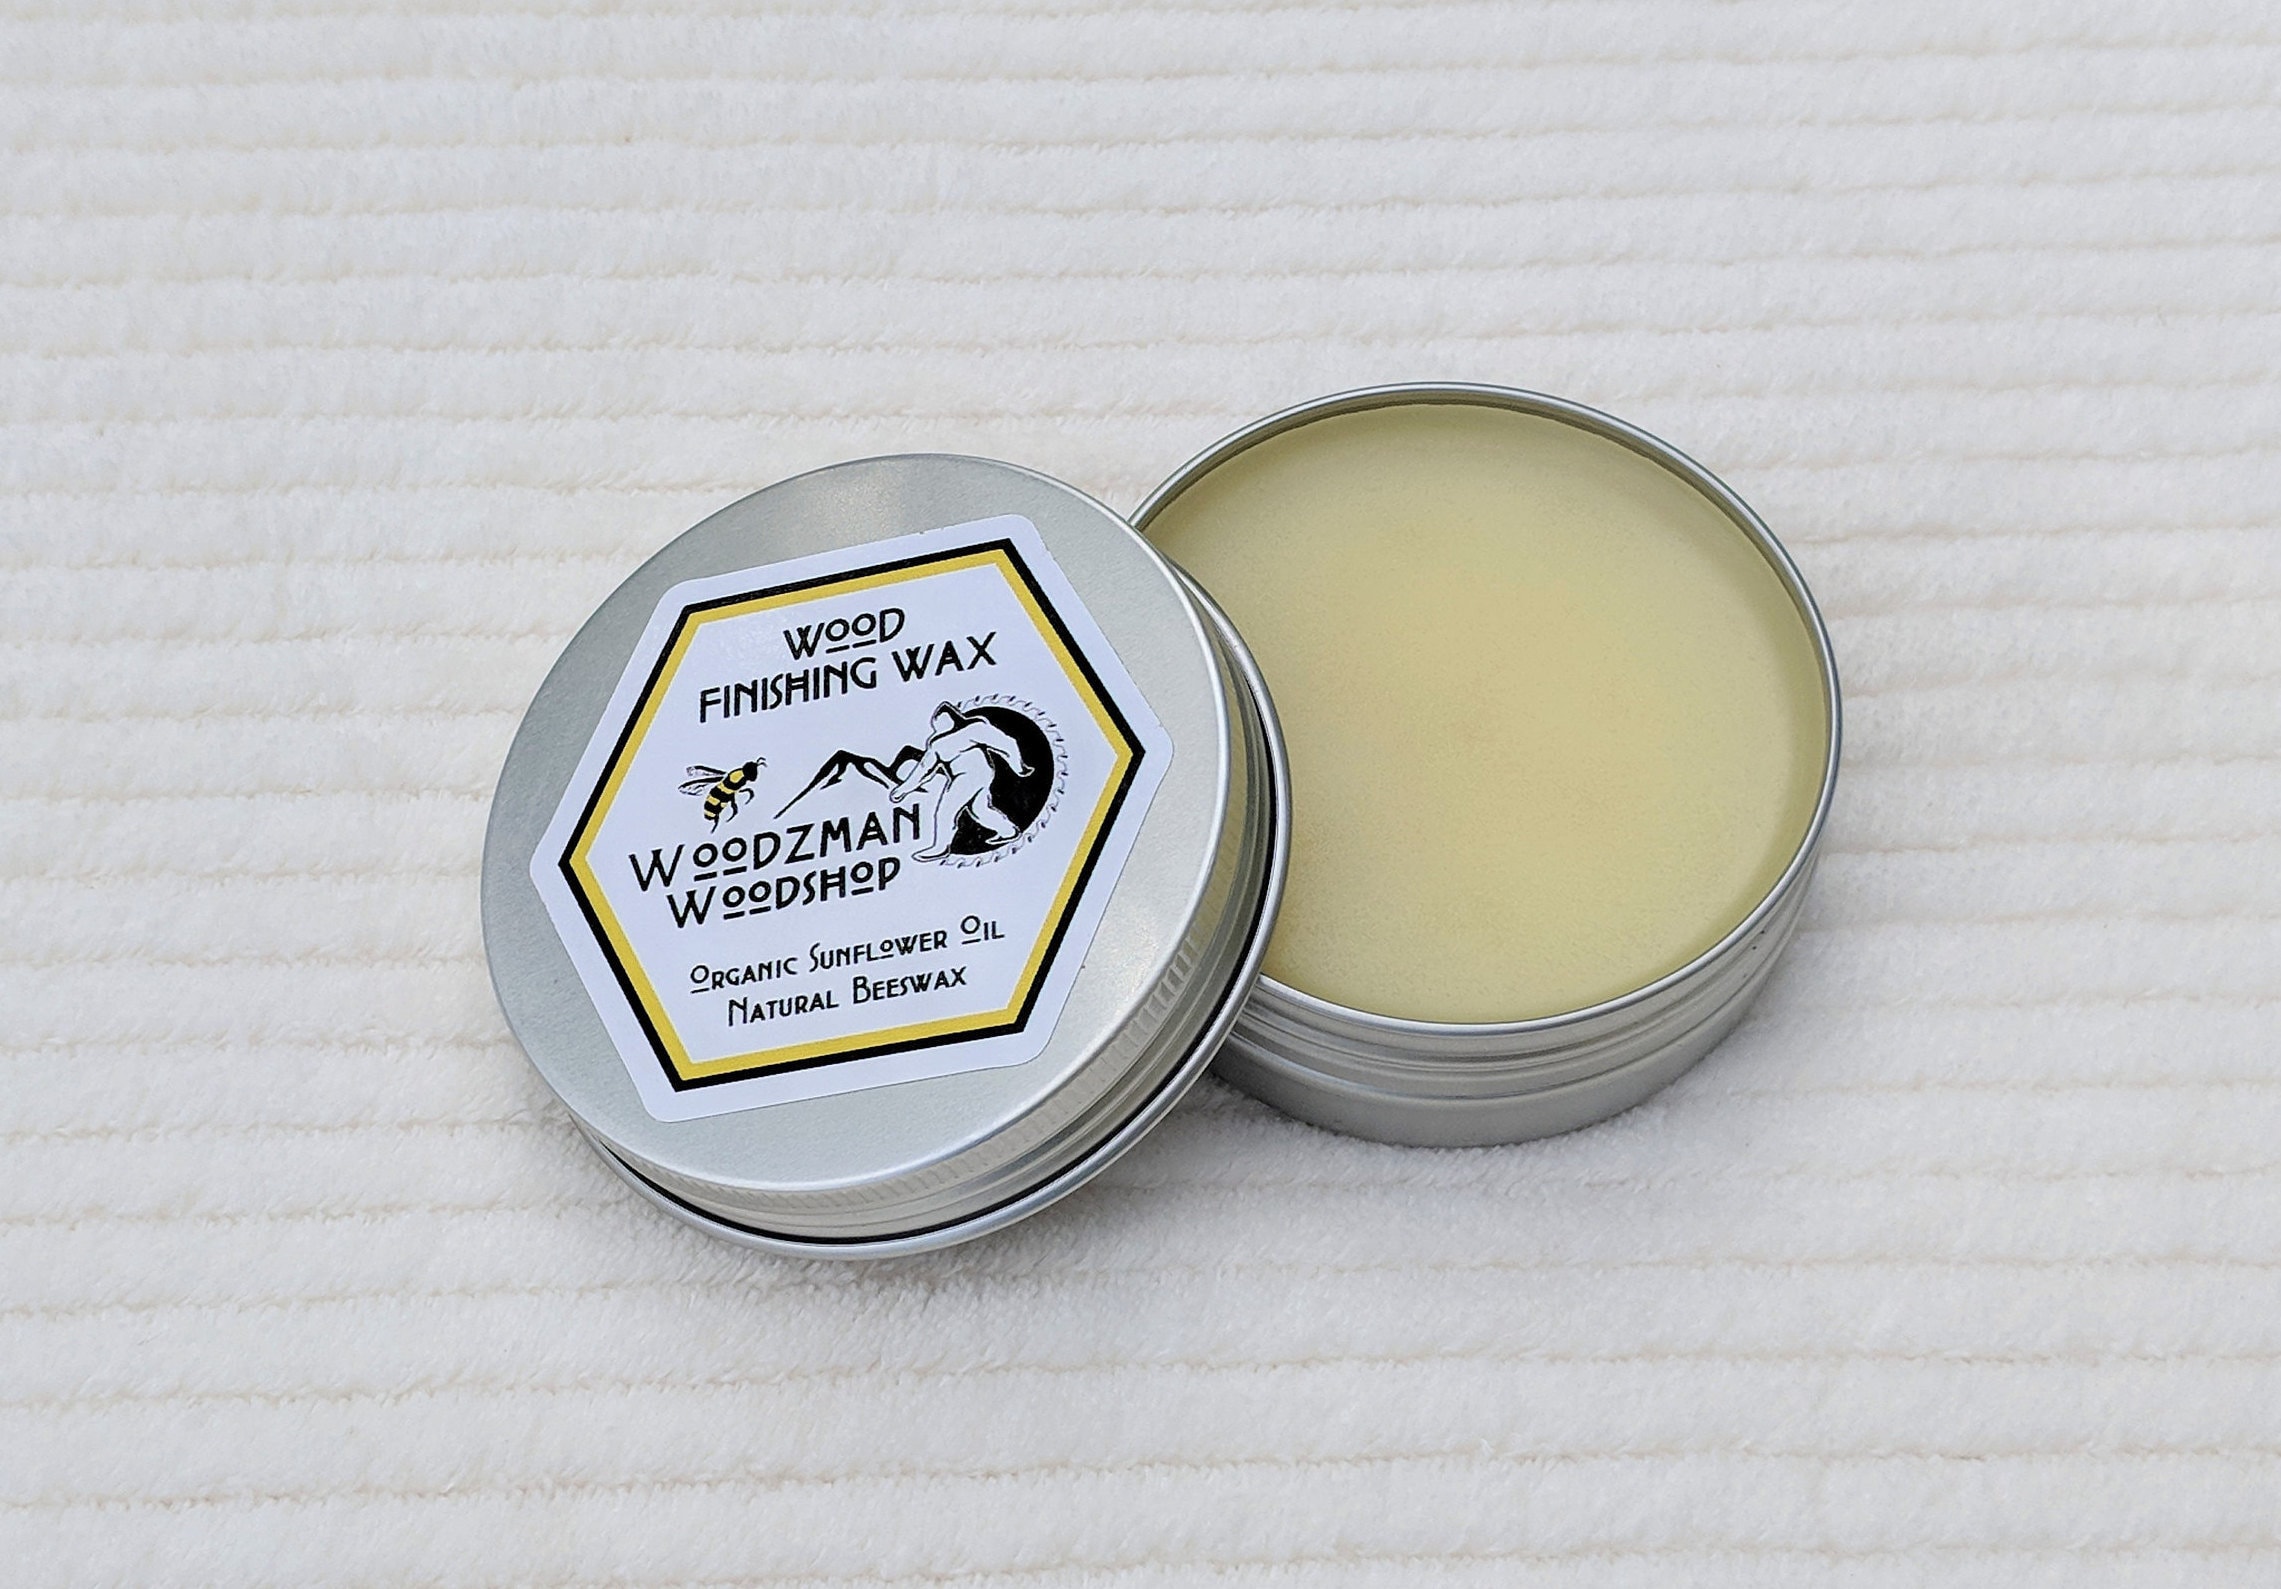 How to Use Natural Beeswax Finishing Wax • Product Review – BBFrosch